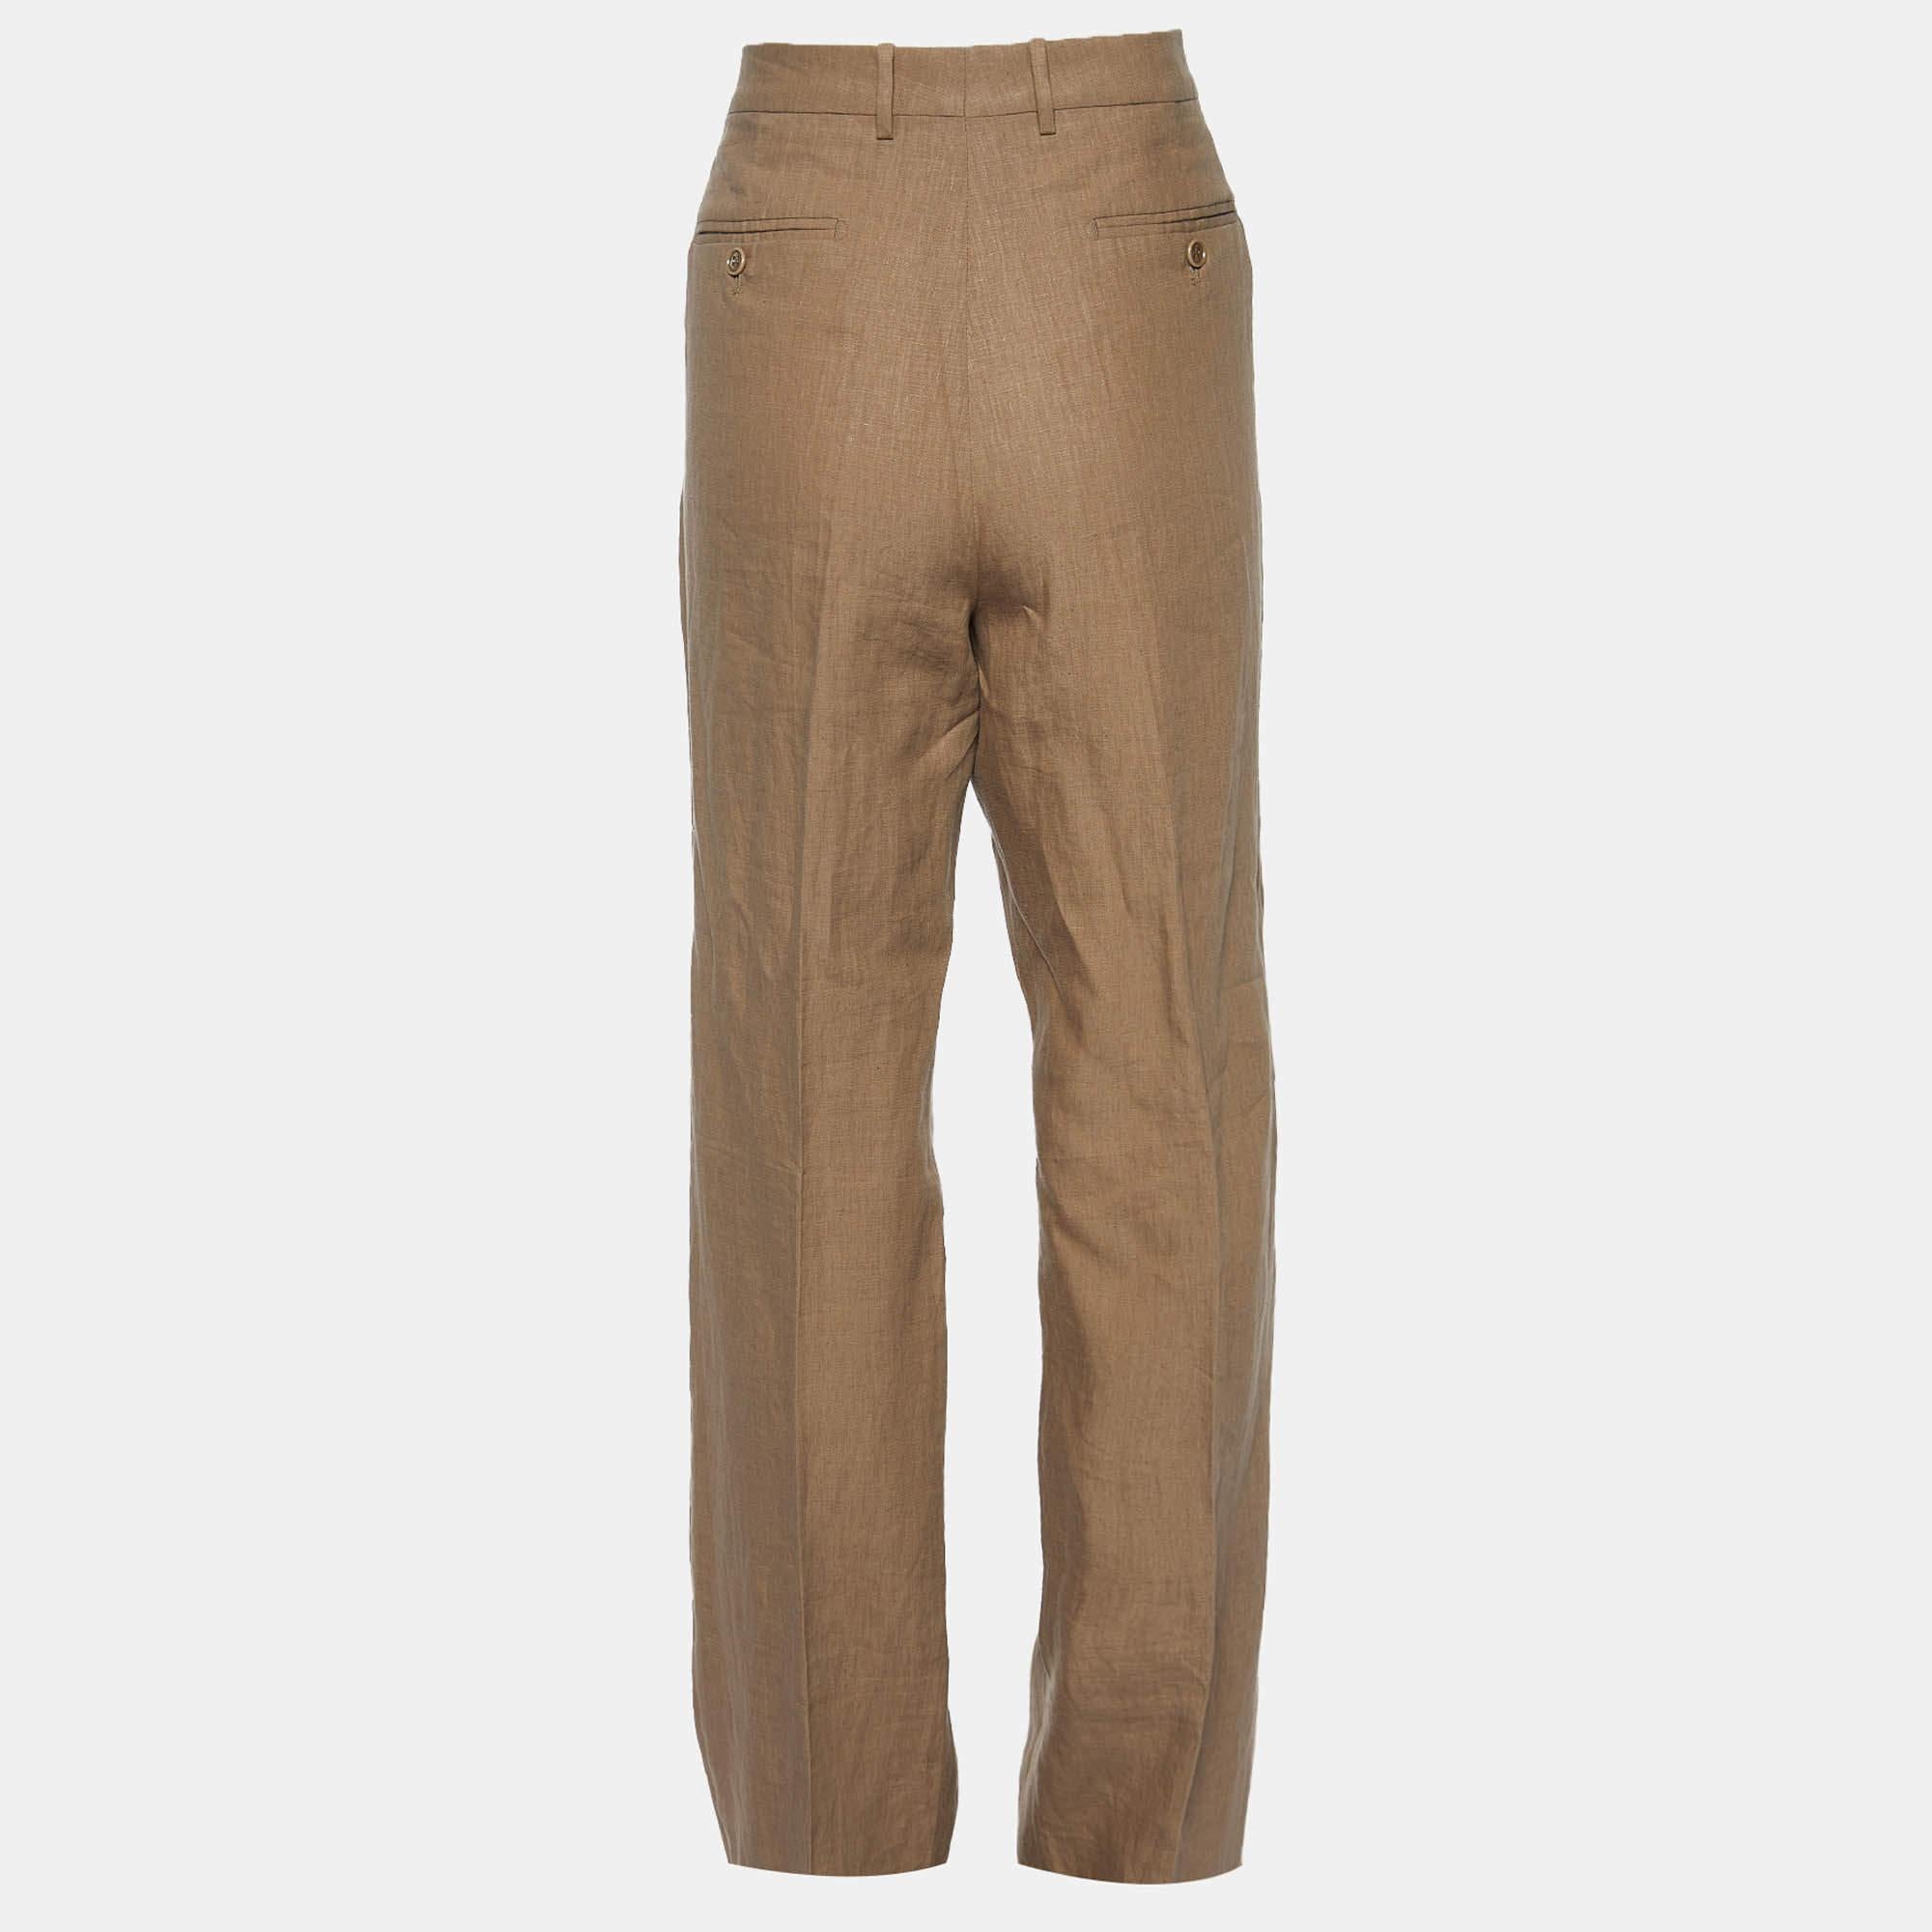 Enhance your formal attire with this pair of trousers. Designed into a superb silhouette and fit, this pair of trousers will definitely make you look elegant.

Includes: Price Tag